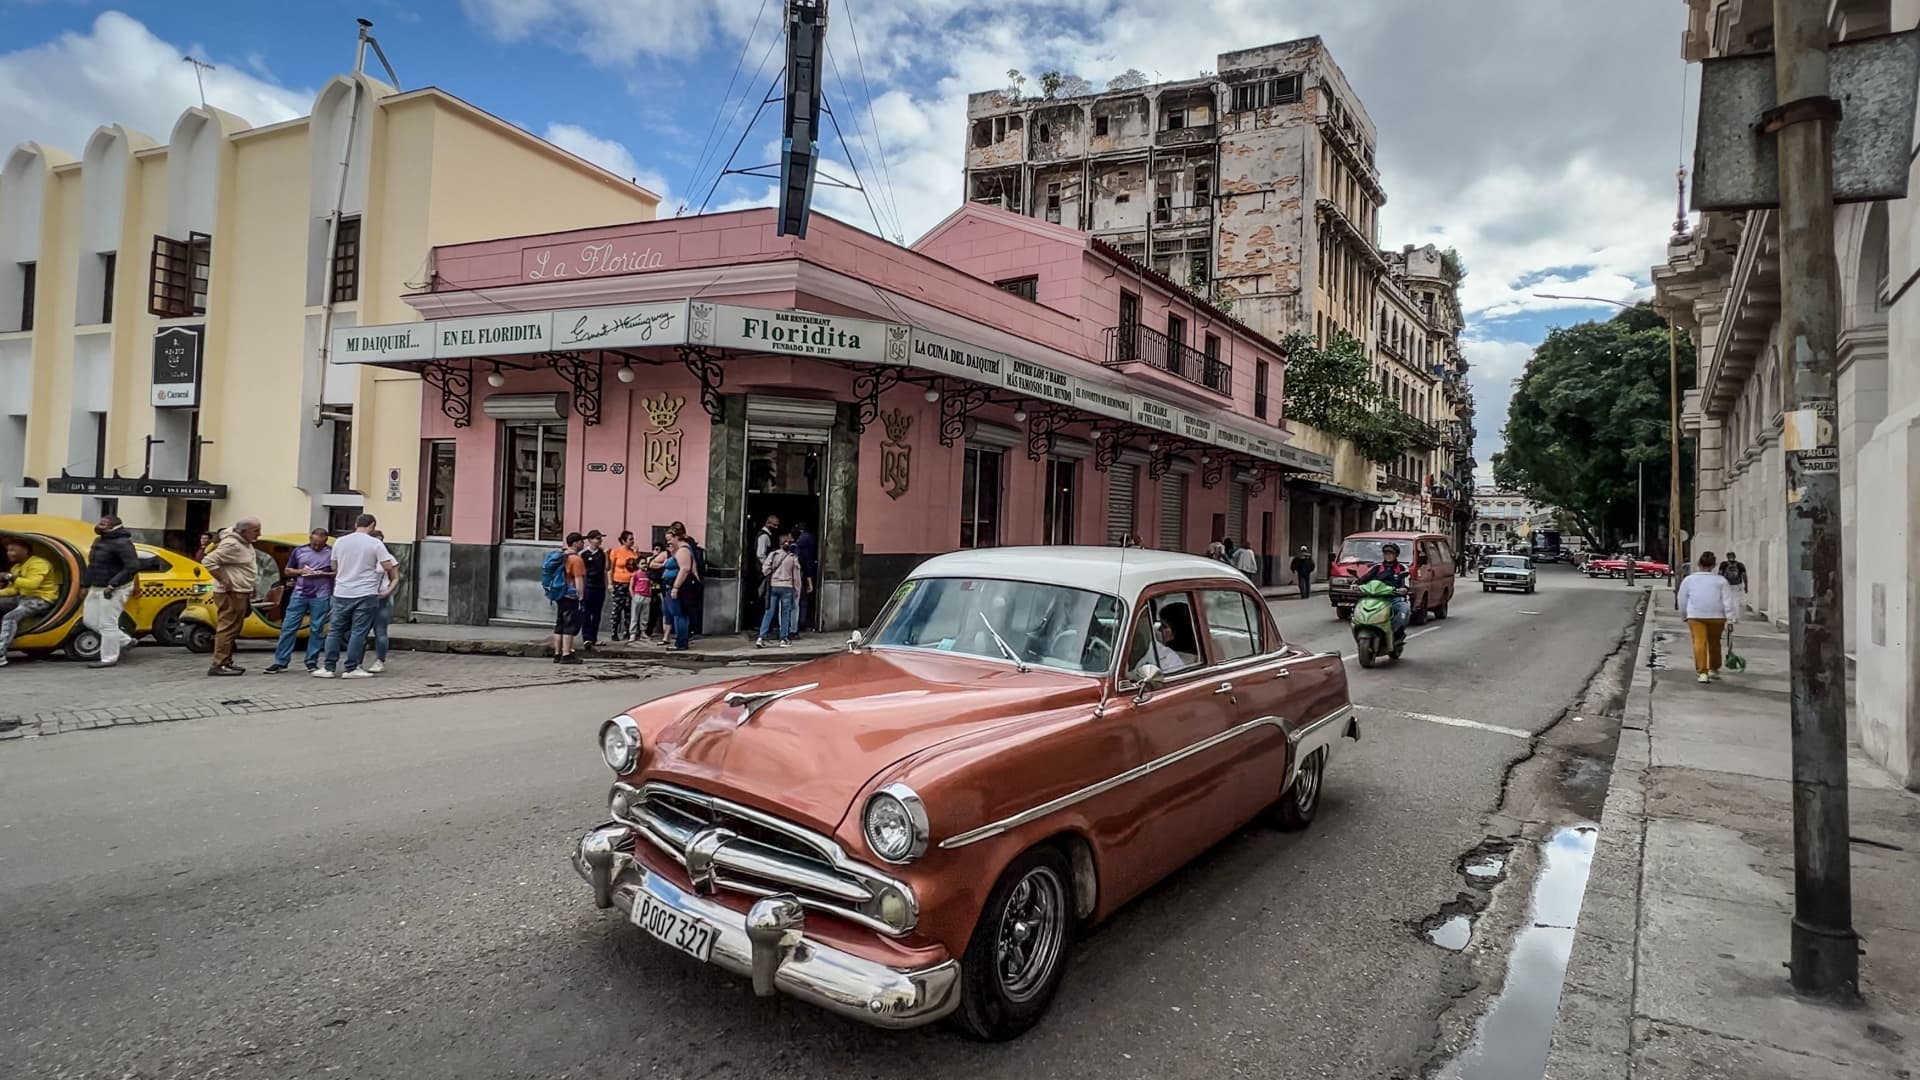 An old American car passes by the Floridita bar in Havana on December 27, 2022.